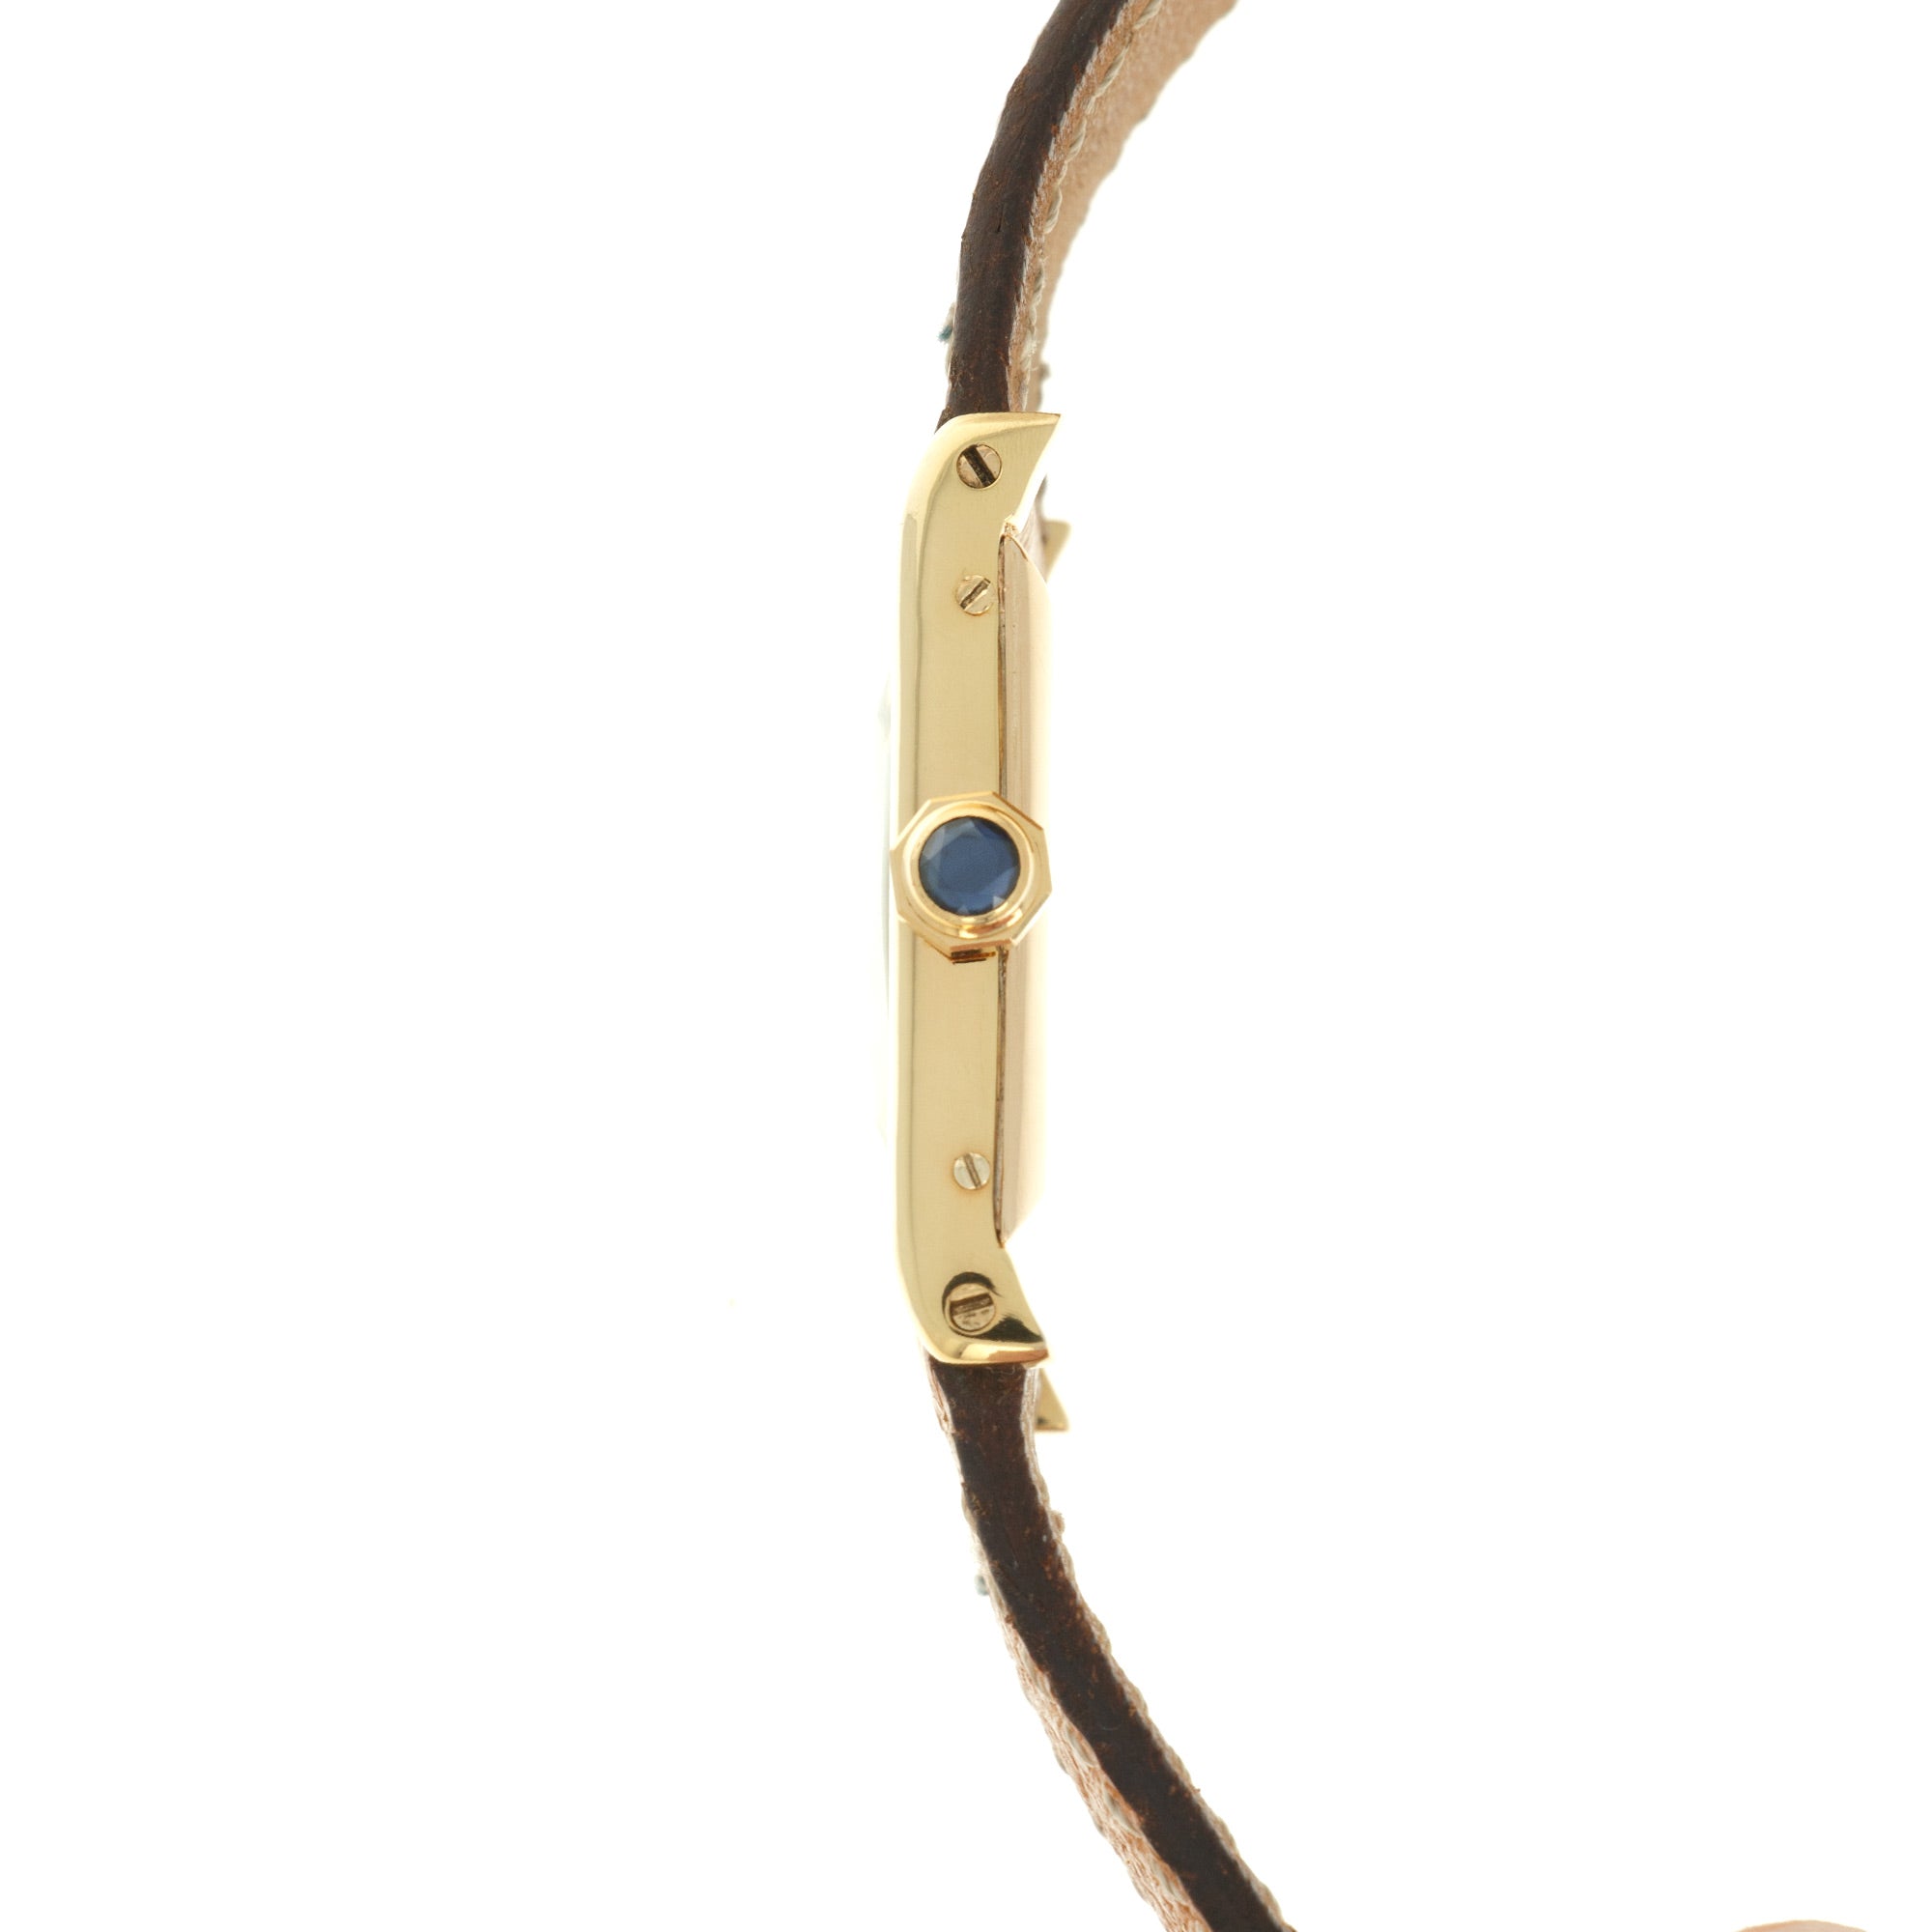 Cartier - Cartier Yellow Gold Large Tank Speciale Watch, 1959 - The Keystone Watches